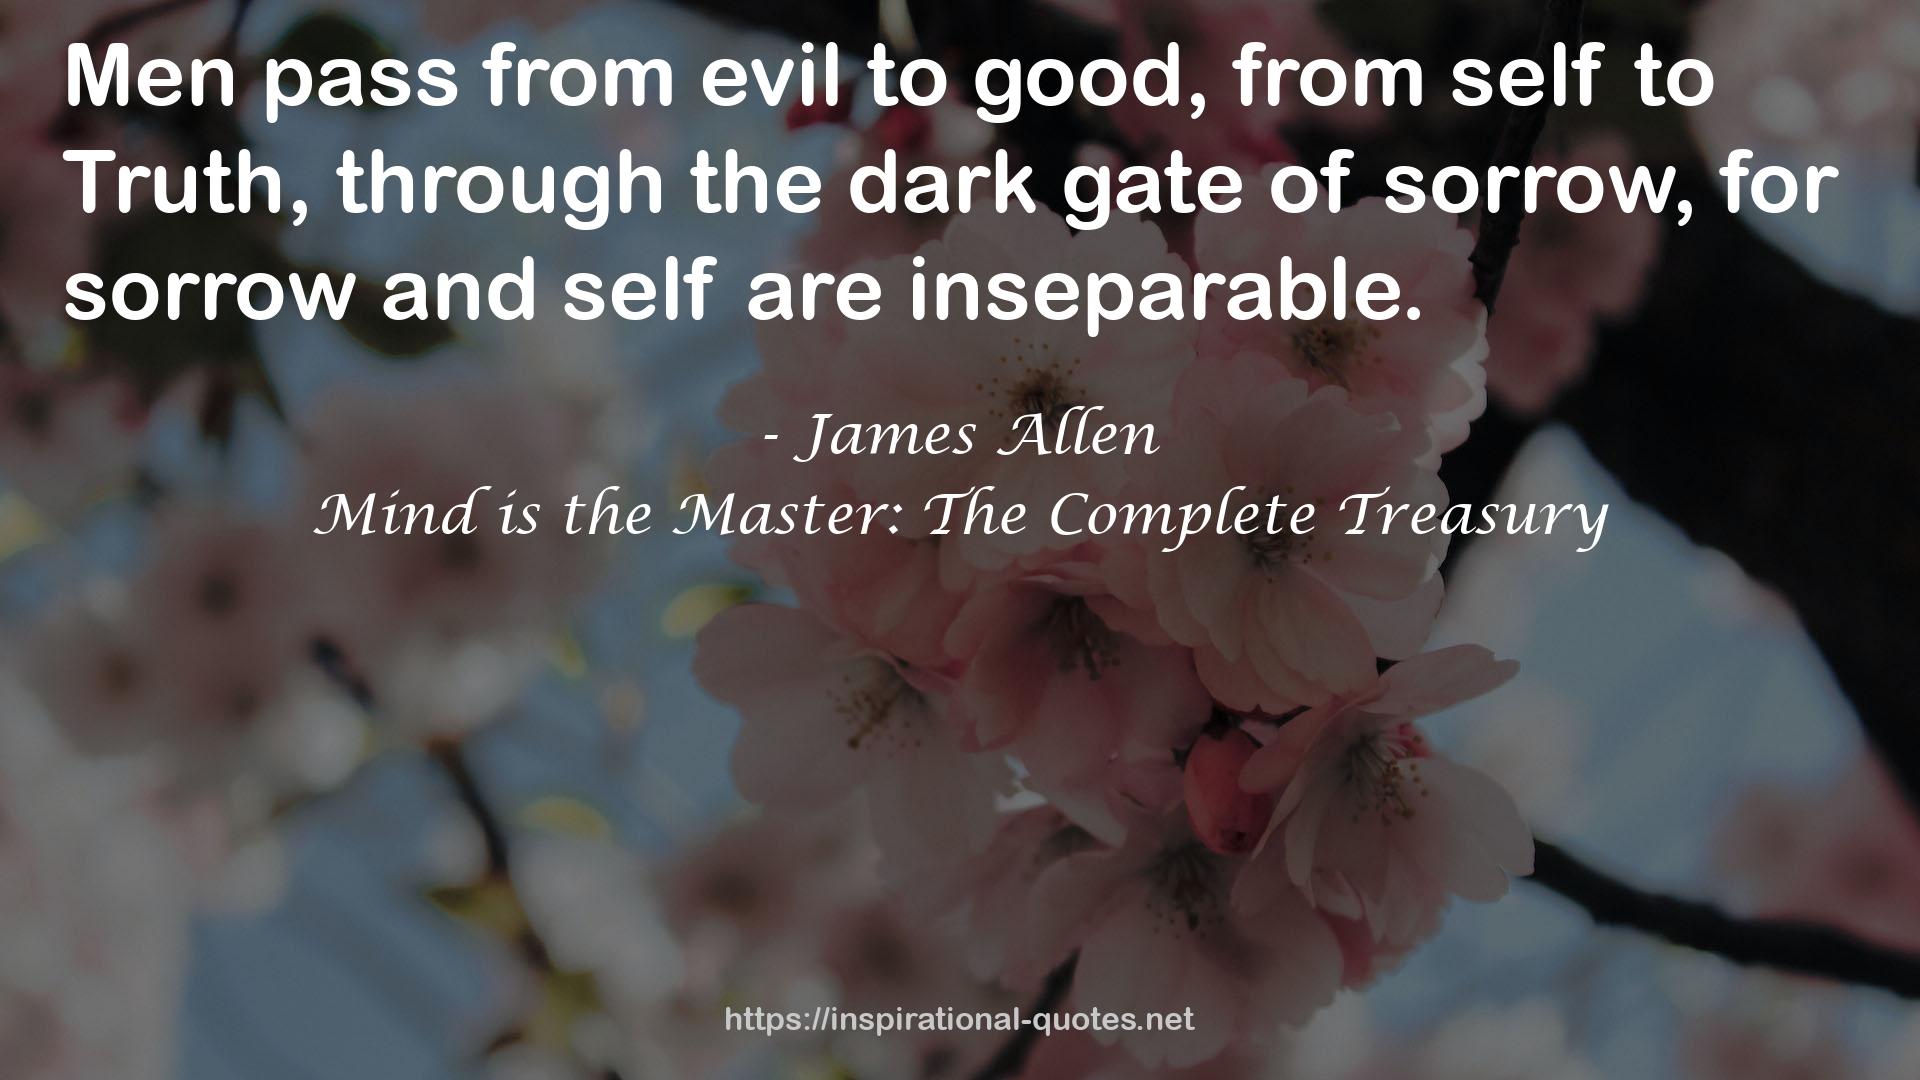 Mind is the Master: The Complete Treasury QUOTES